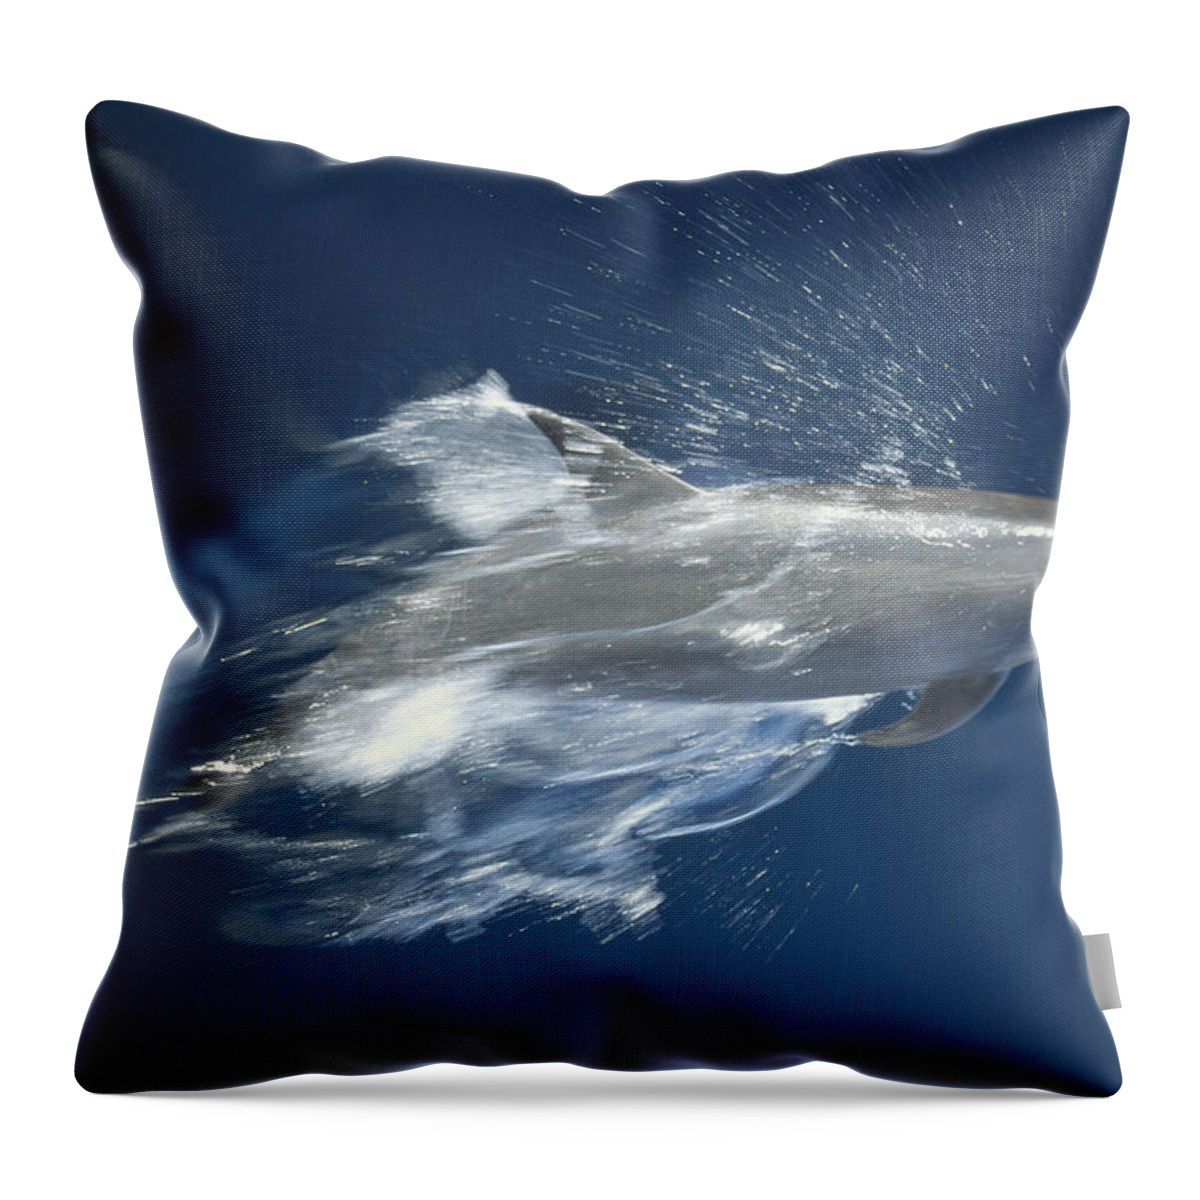 Feb0514 Throw Pillow featuring the photograph Bottlenose Dolphin Leaping Playfully by Tui De Roy